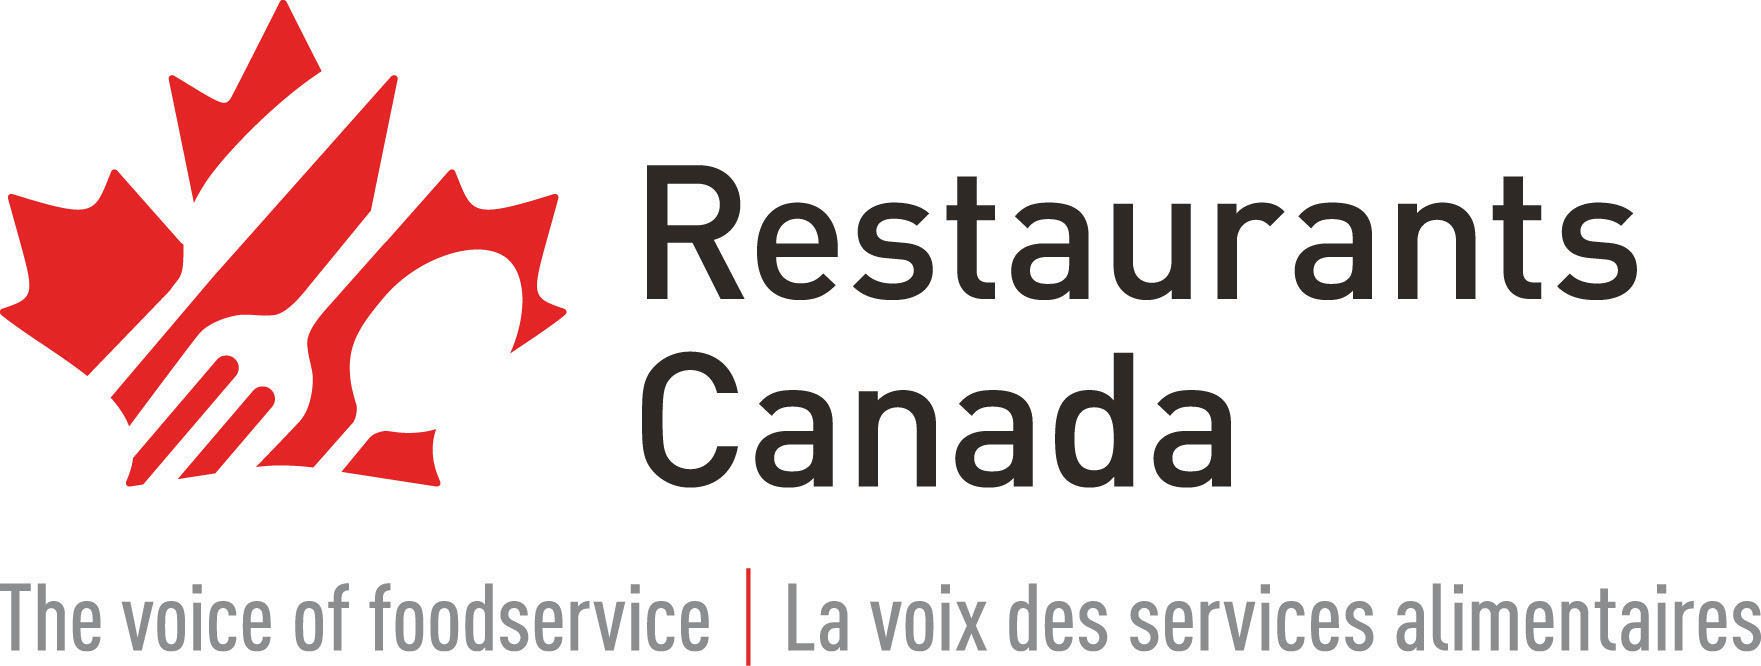 Restaurants Canada - new name and logo on the menu